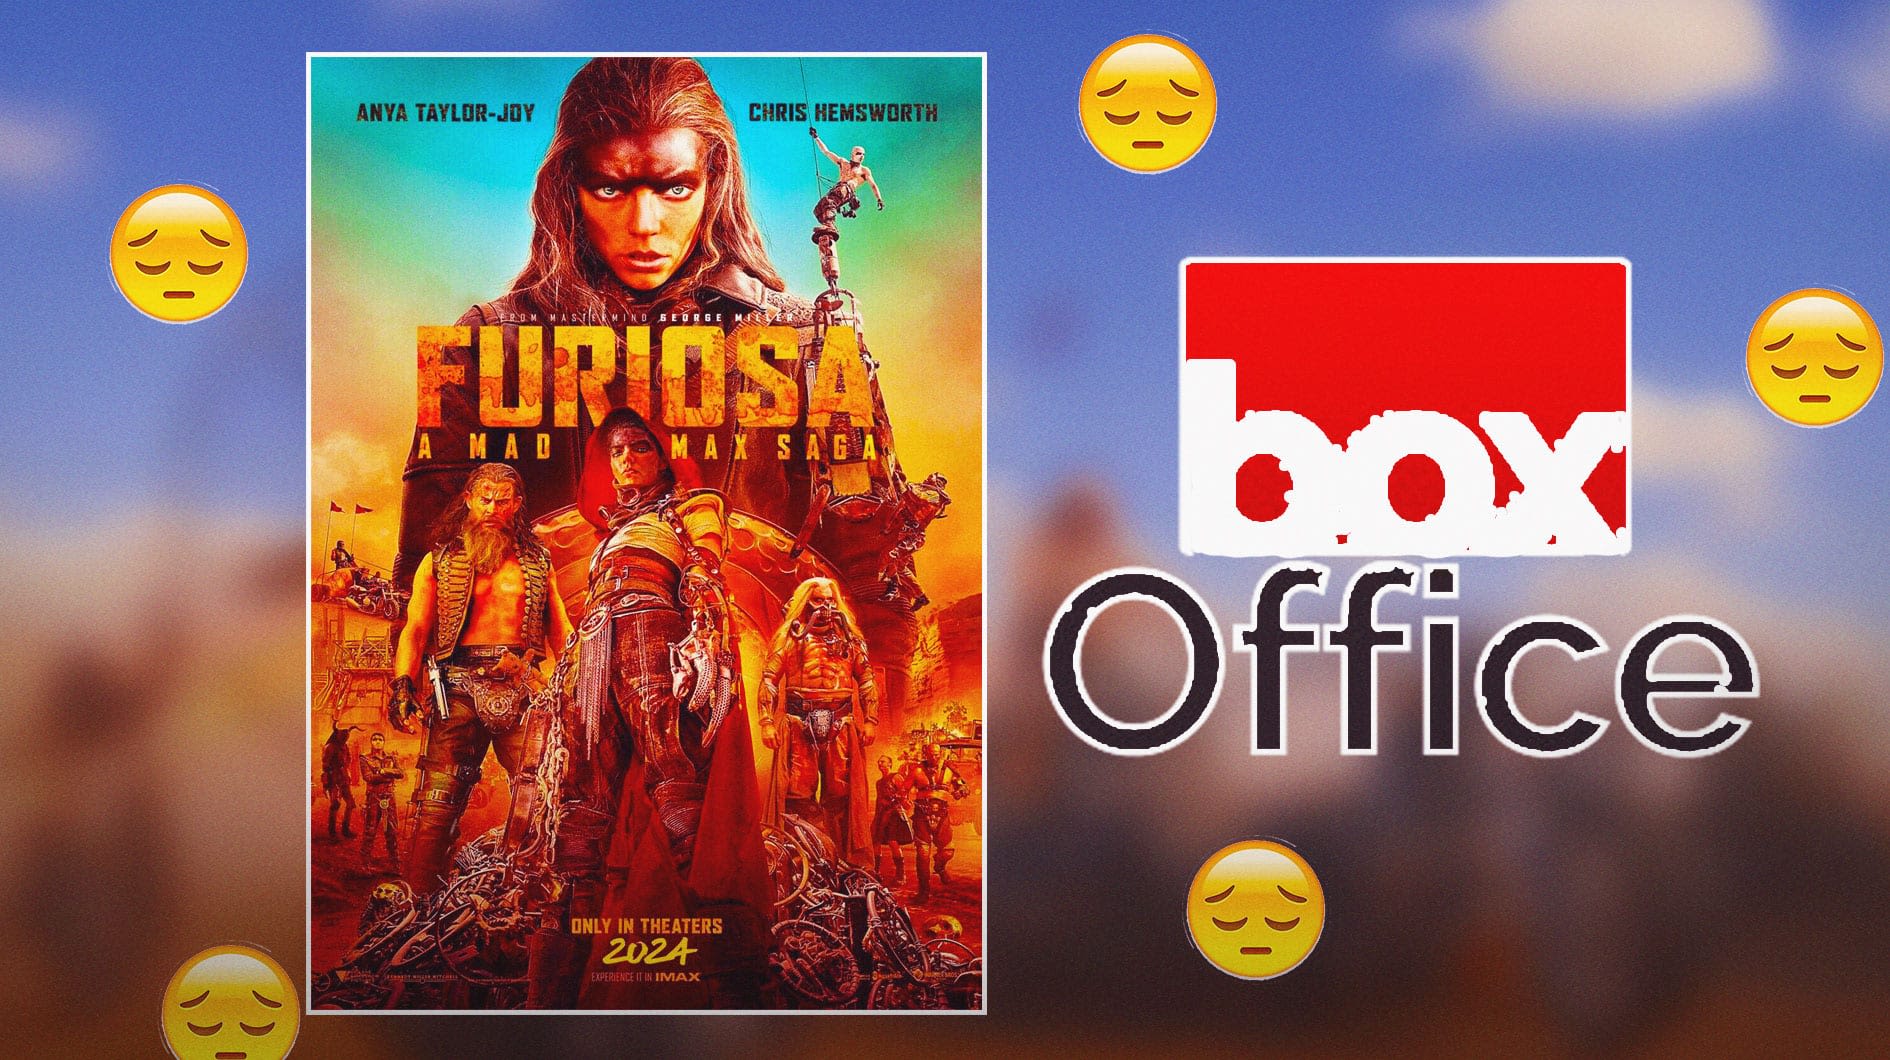 Furiosa’s disappointing box office results pause Wasteland efforts